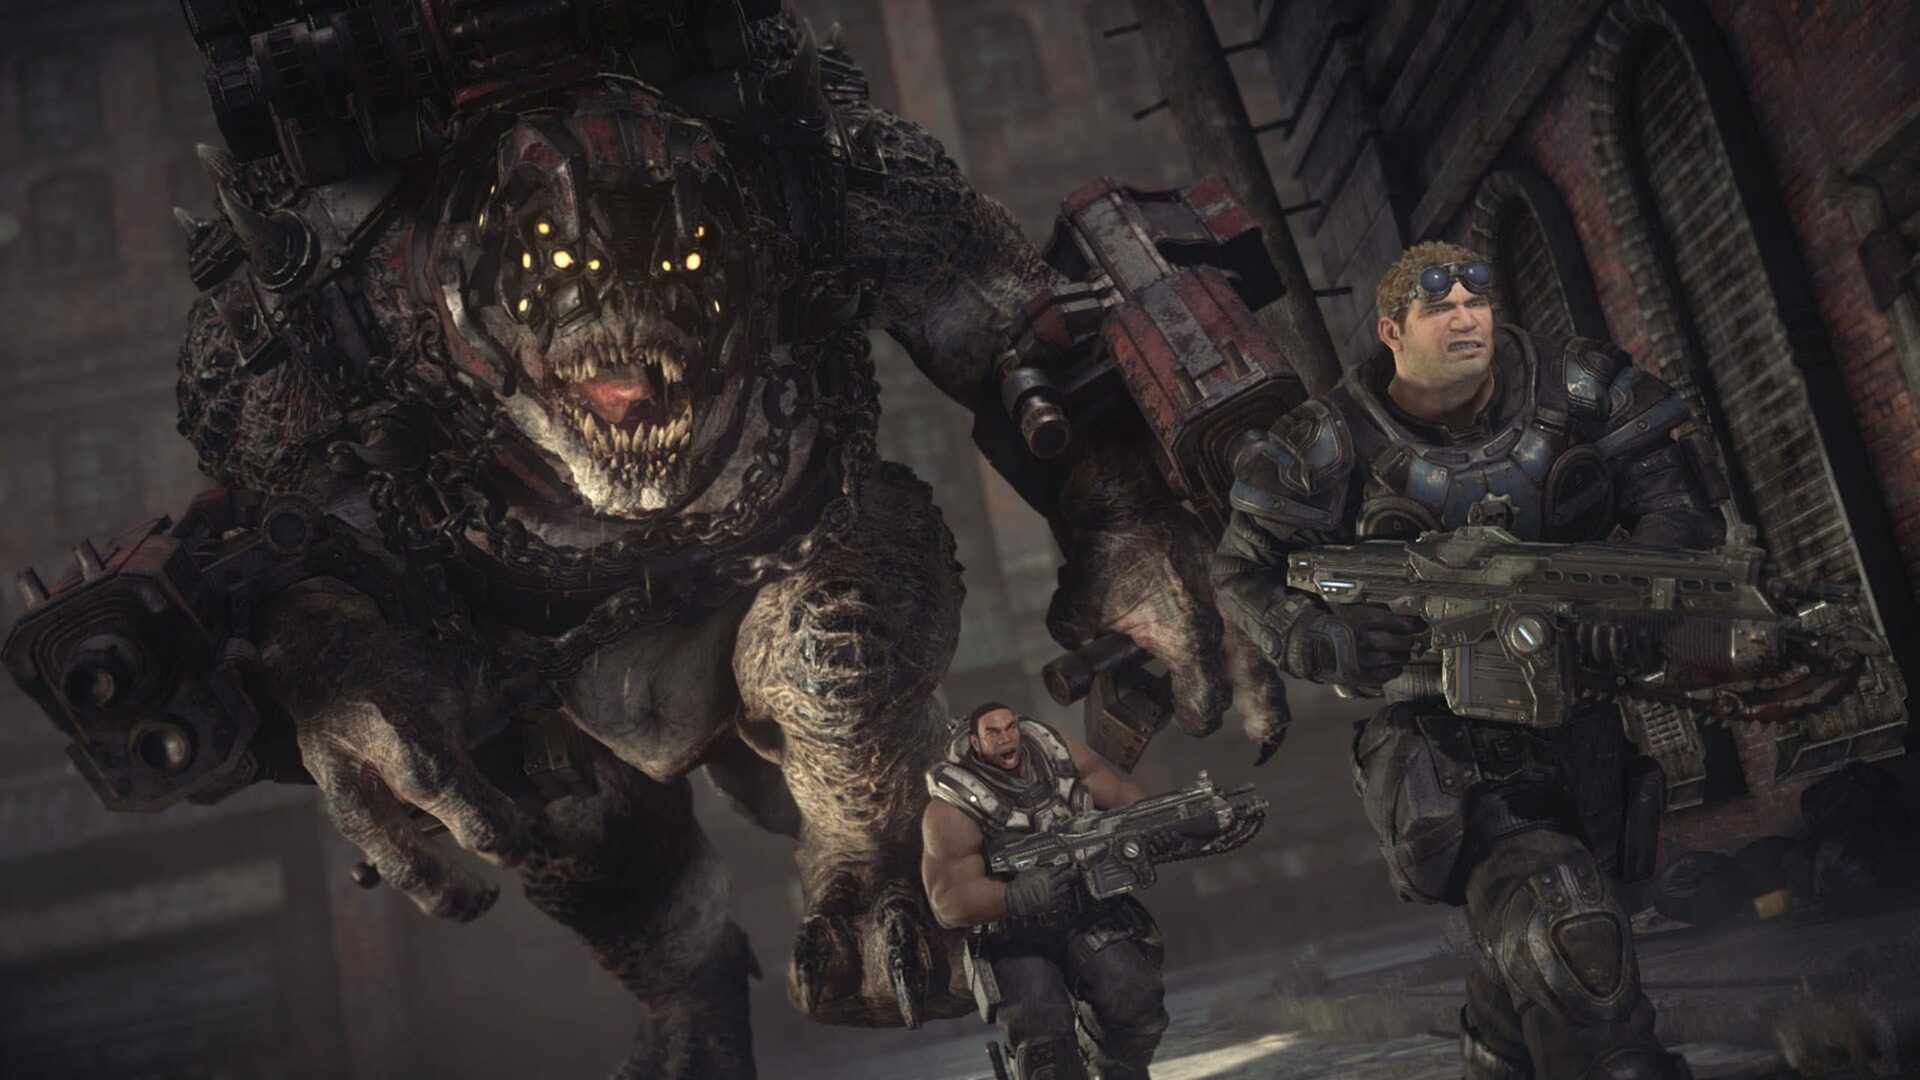 Gears of War: Ultimate Edition Xbox One key, Cheaper